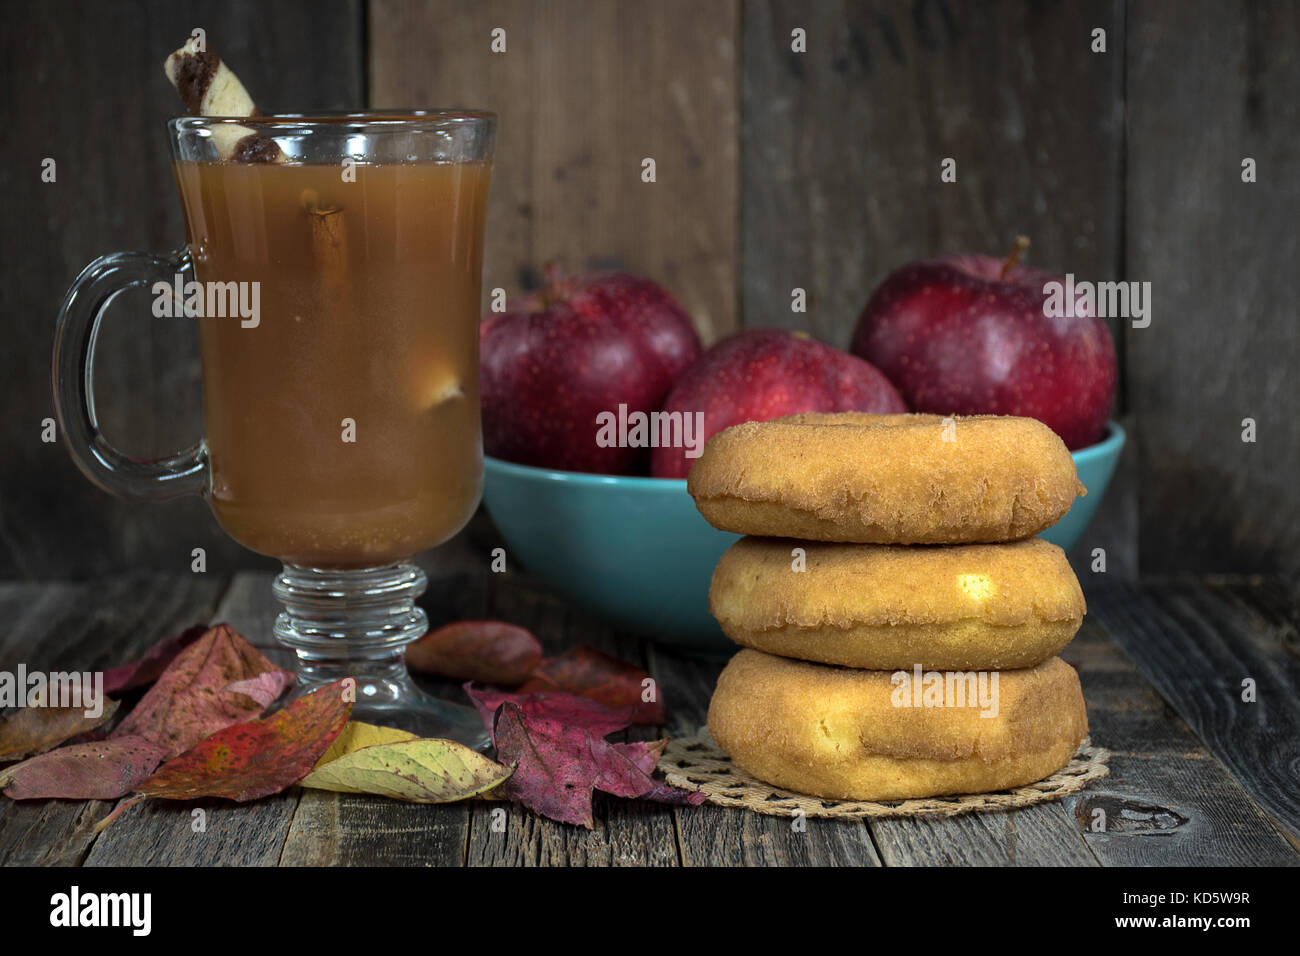 apple cider and donuts with autumn leaves and red apples on rustic wood Stock Photo